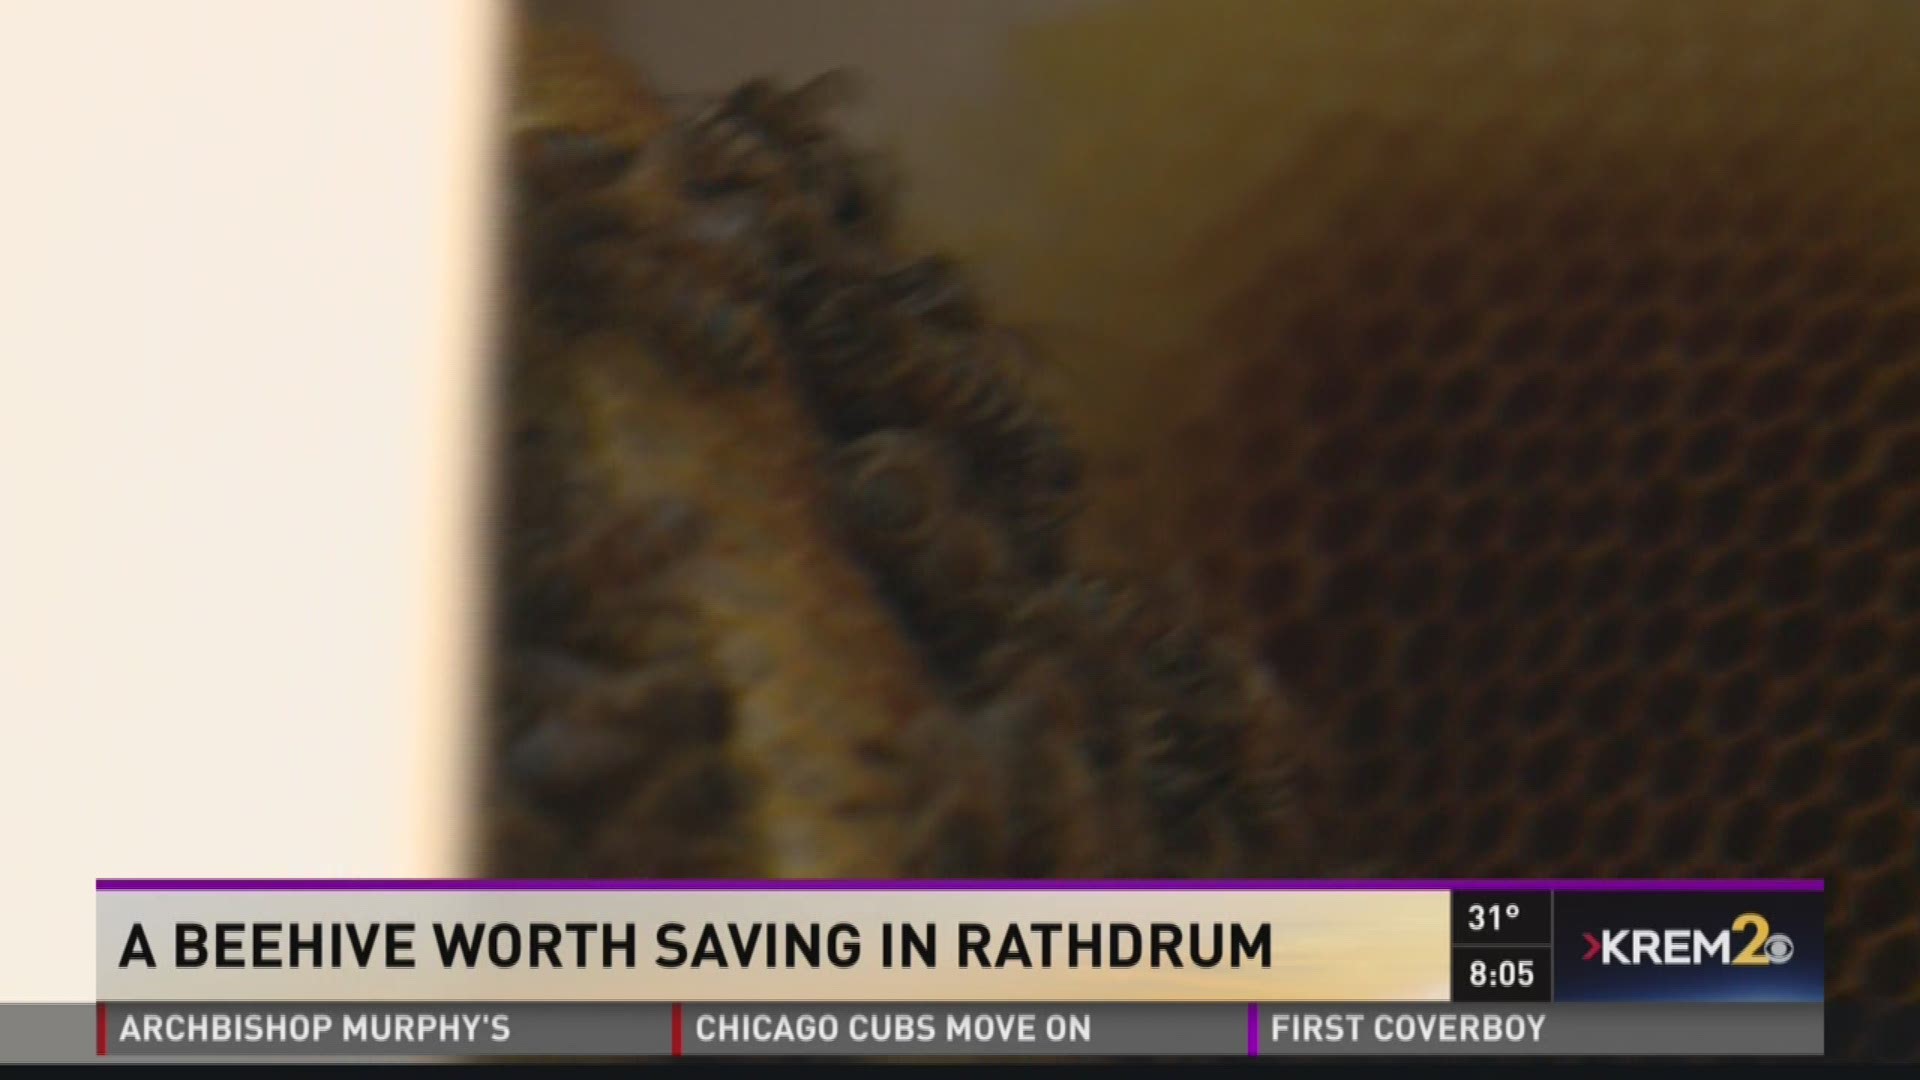 A beehive worth saving in Rathdrum